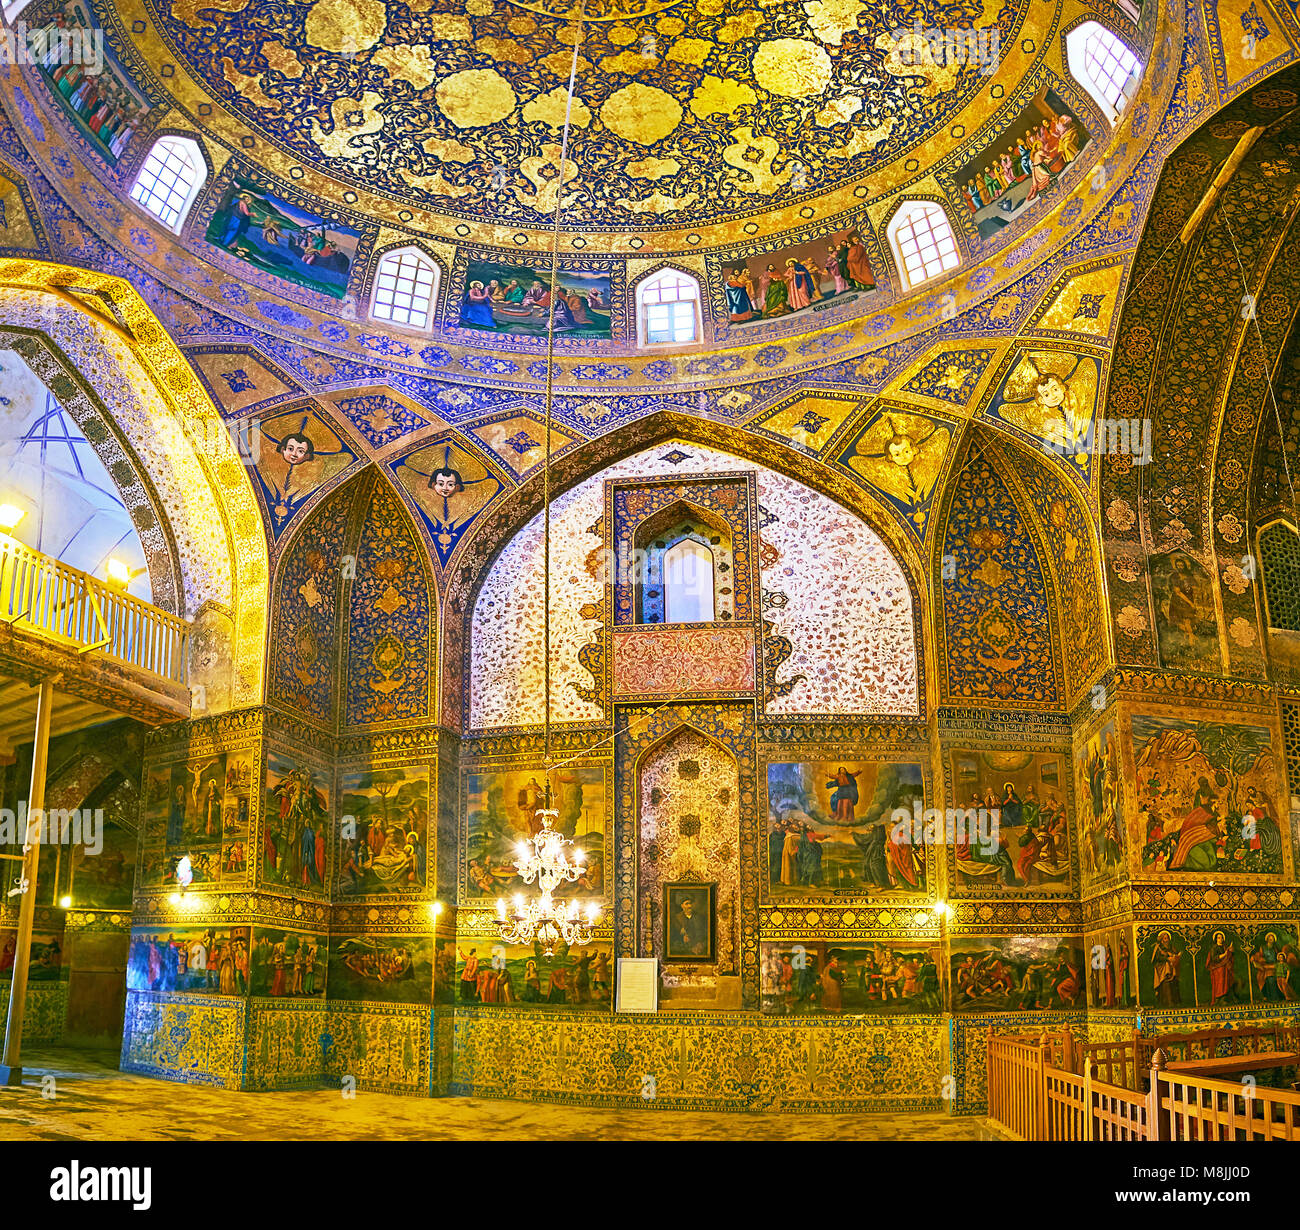 ISFAHAN, IRAN - OCTOBER 20,2017: The  richly decorated prayer hall of Armenian Orthodox Bethlehem Church in New Julfa, walls and dome are covered with Stock Photo